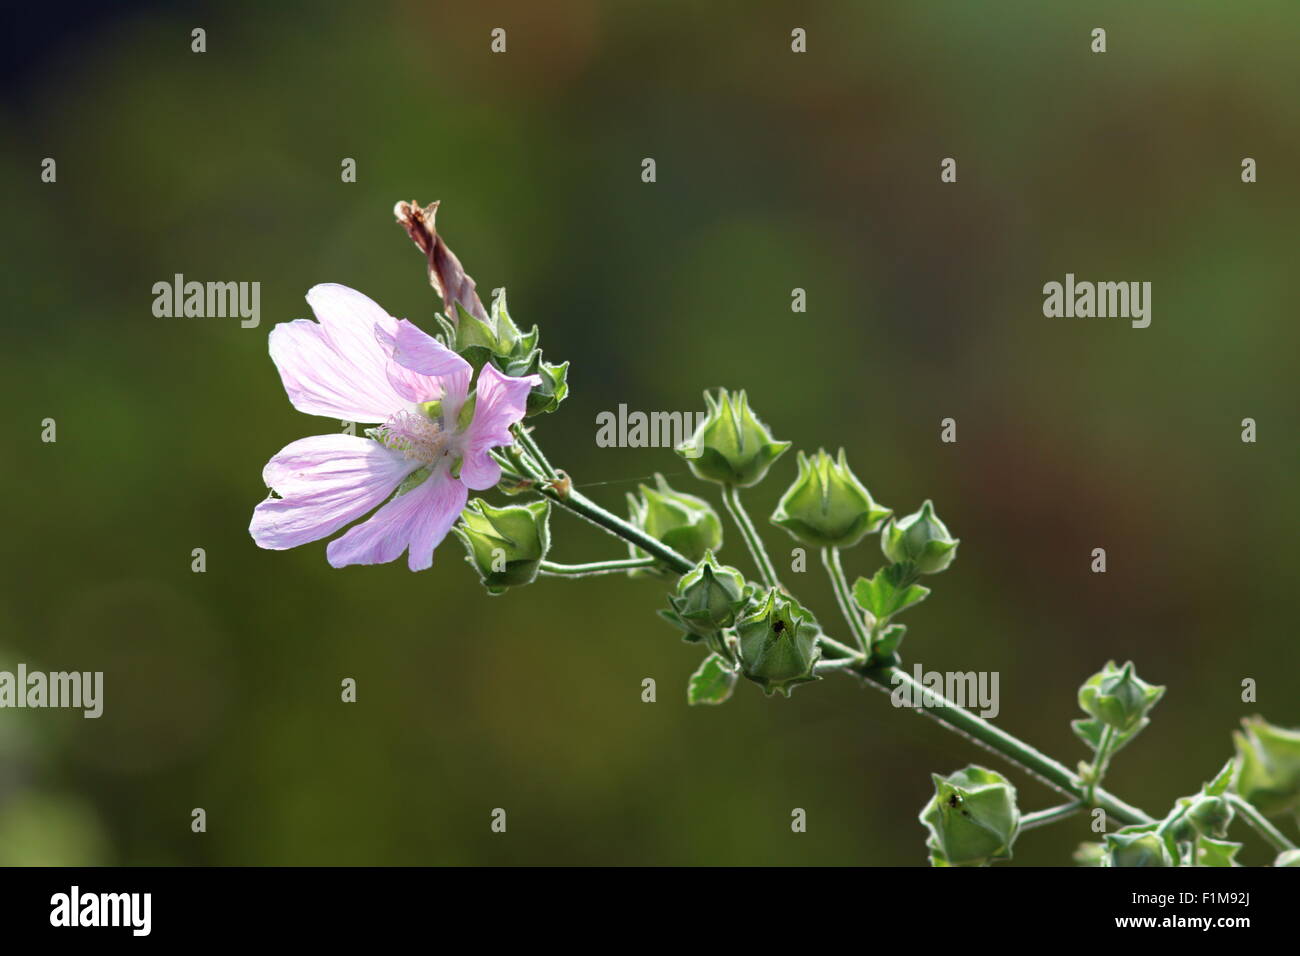 detail of wild violet malva sylvestris over out of focus green summer background Stock Photo